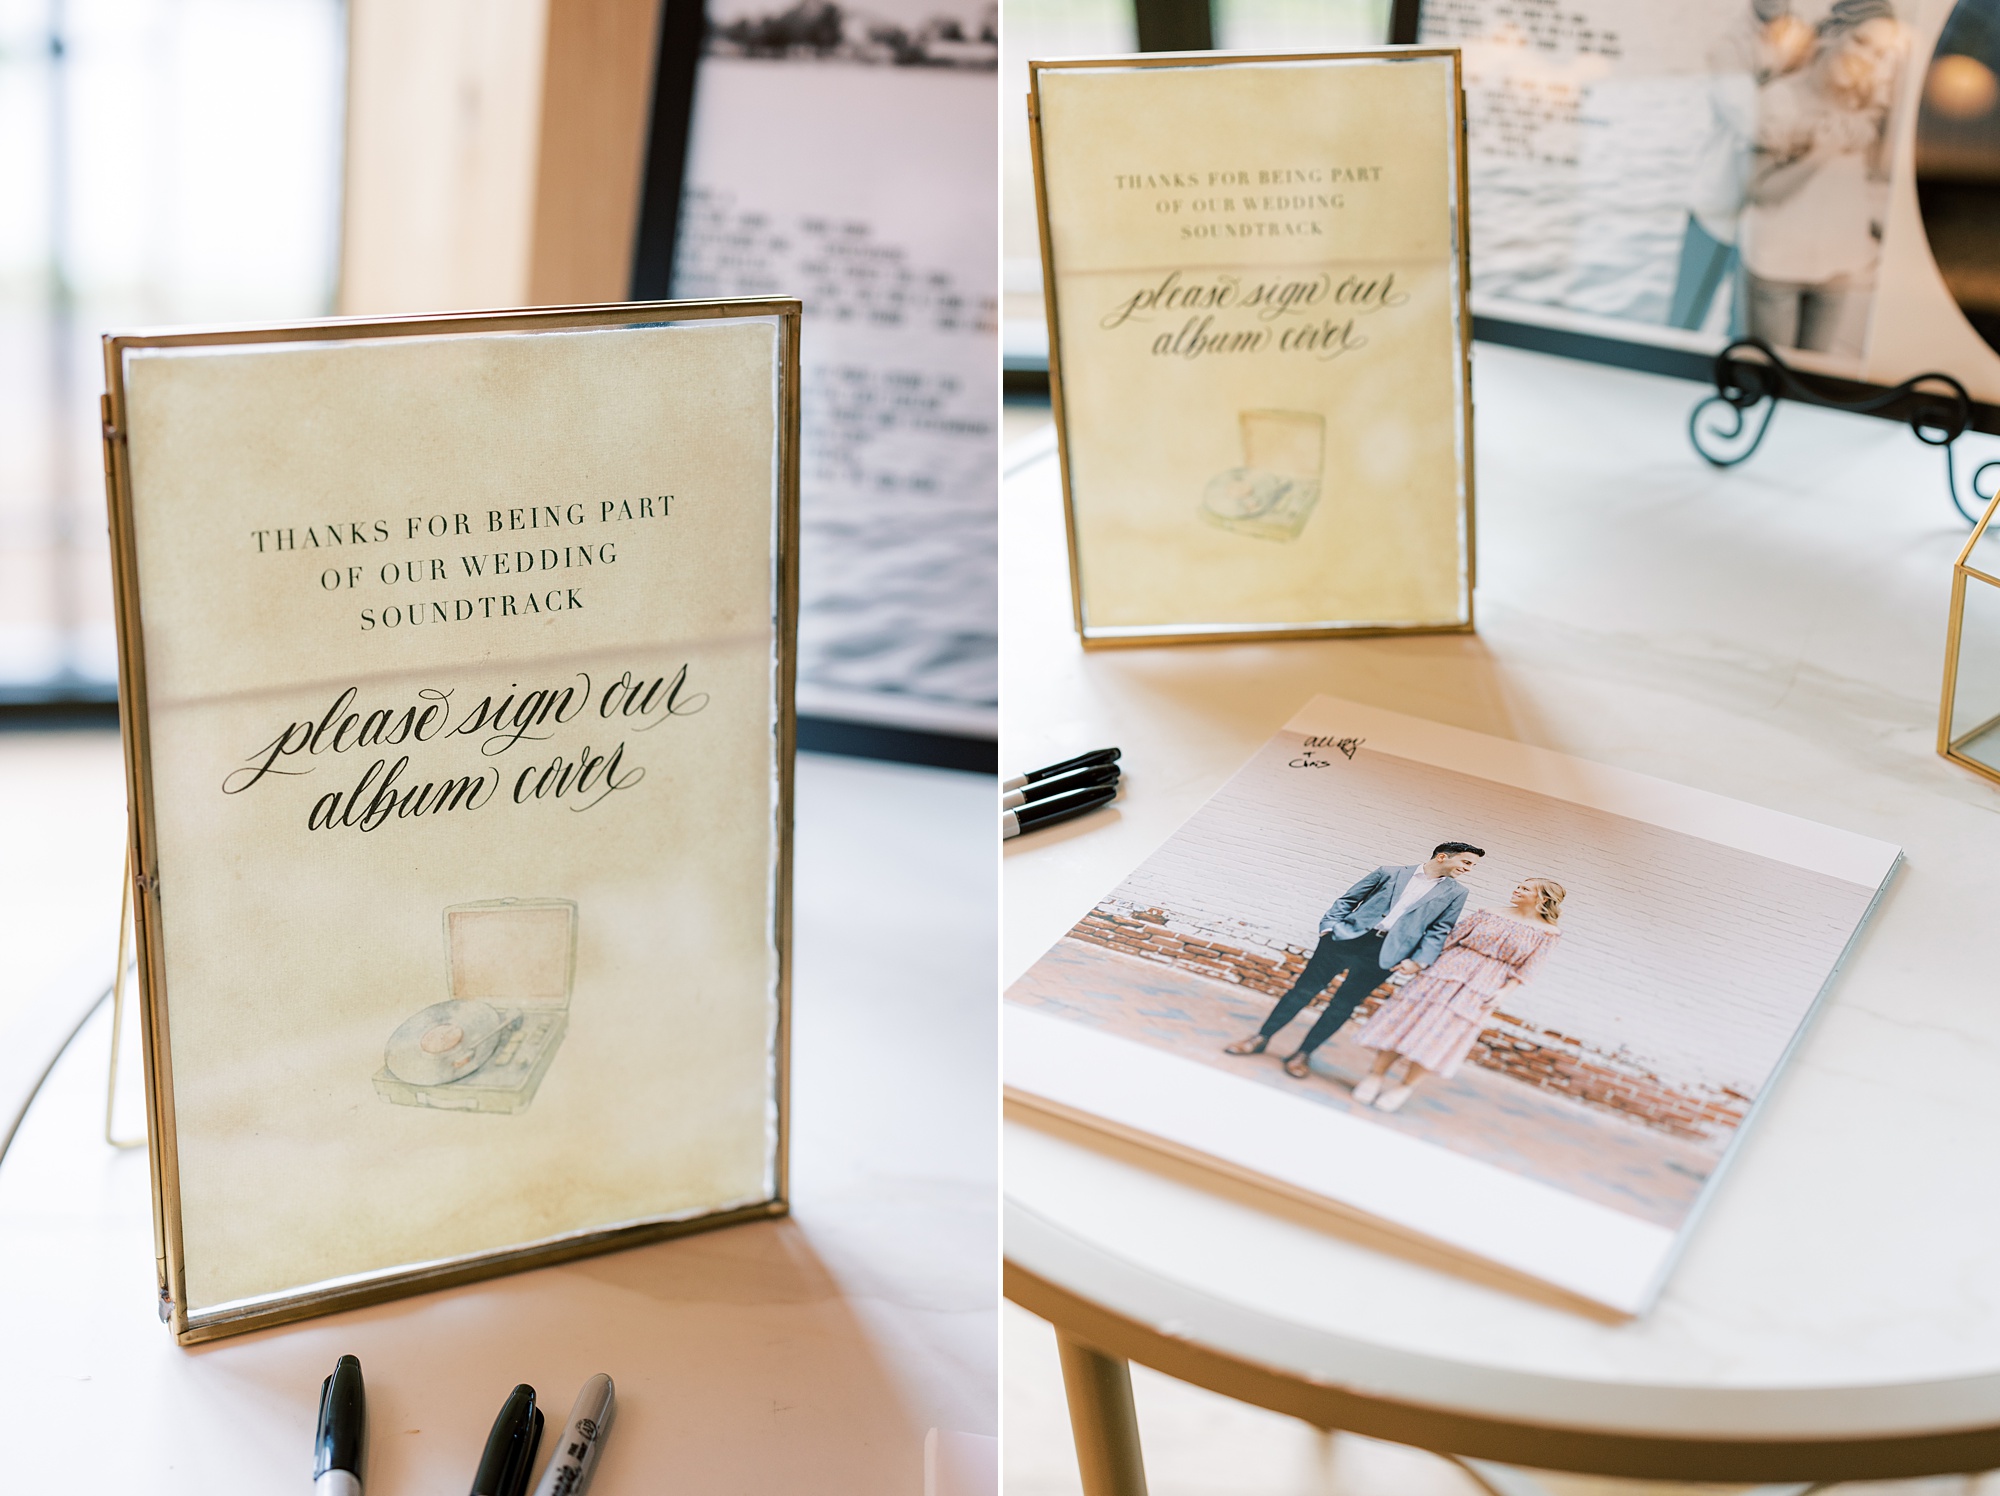 vinyl cover guest book for wedding reception 